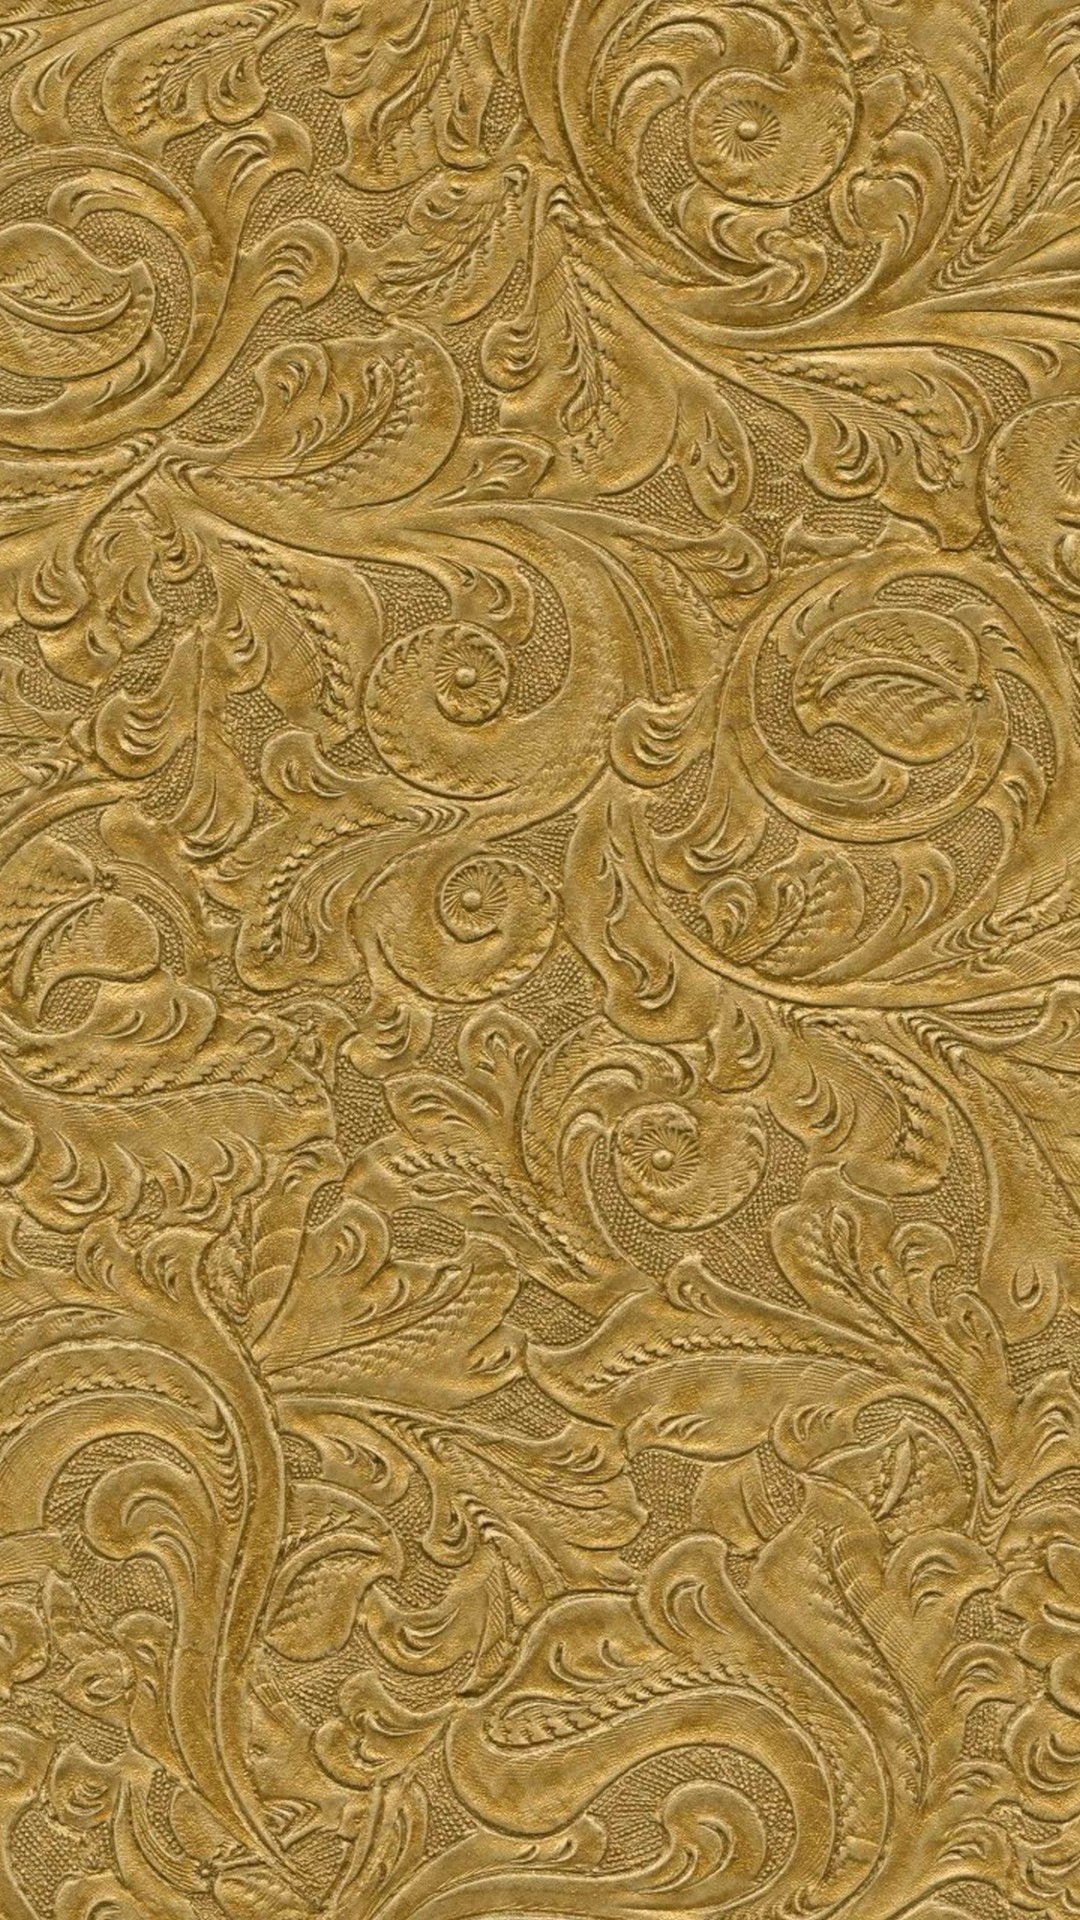 Gold Designs Android Wallpaper High Resolution 1080X1920